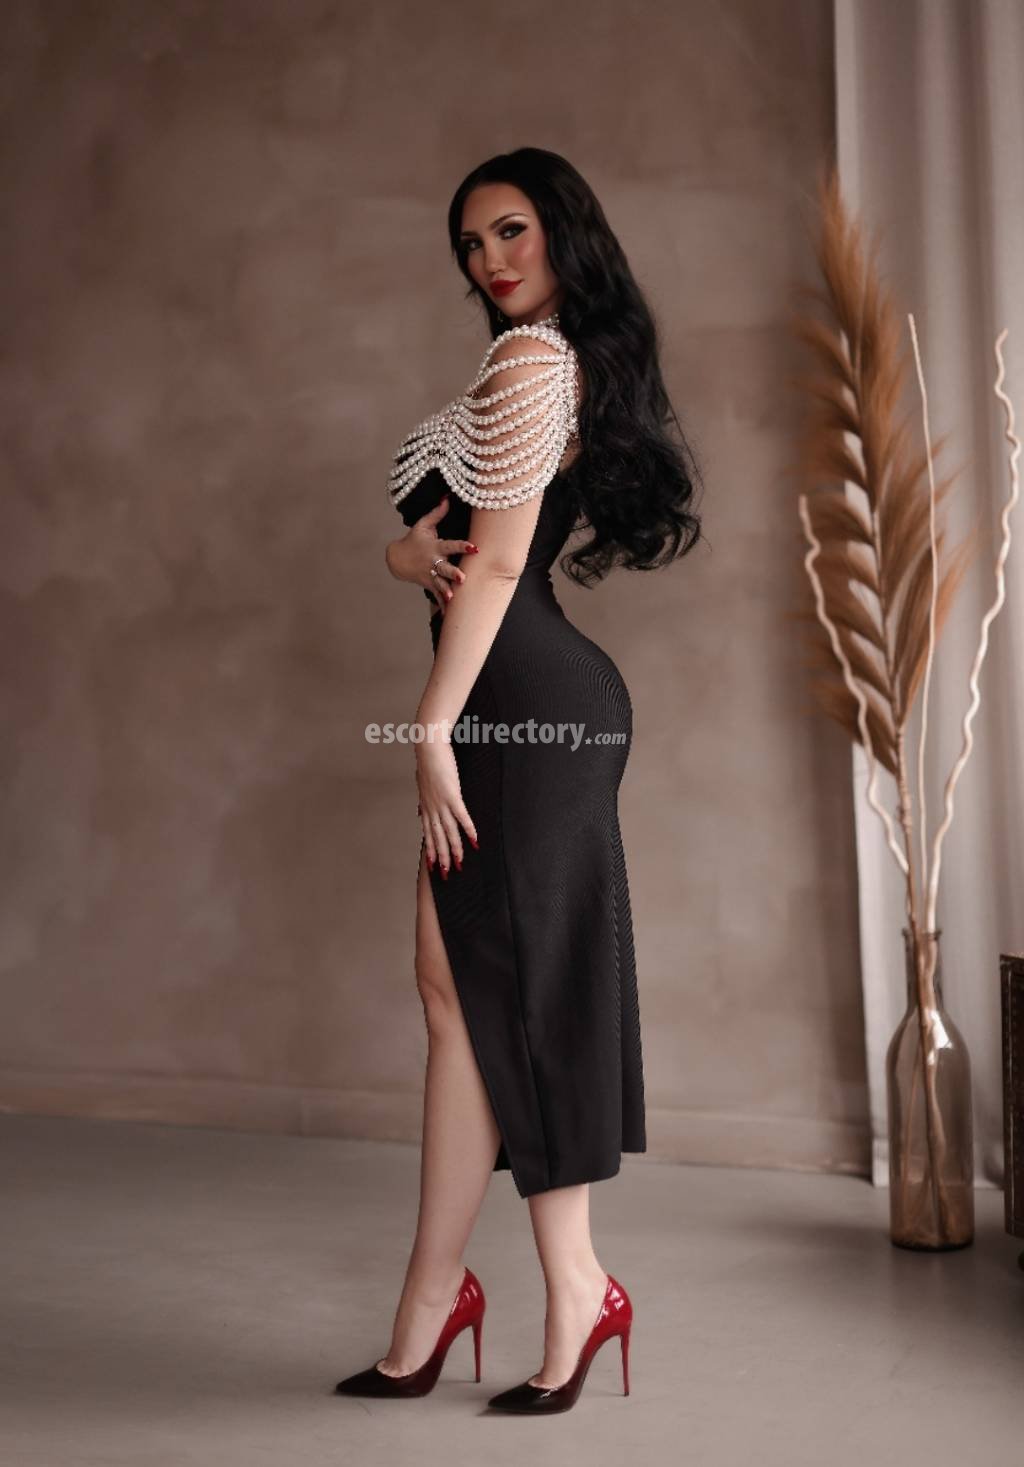 Anna-Belle escort in Montreal offers Handjob services